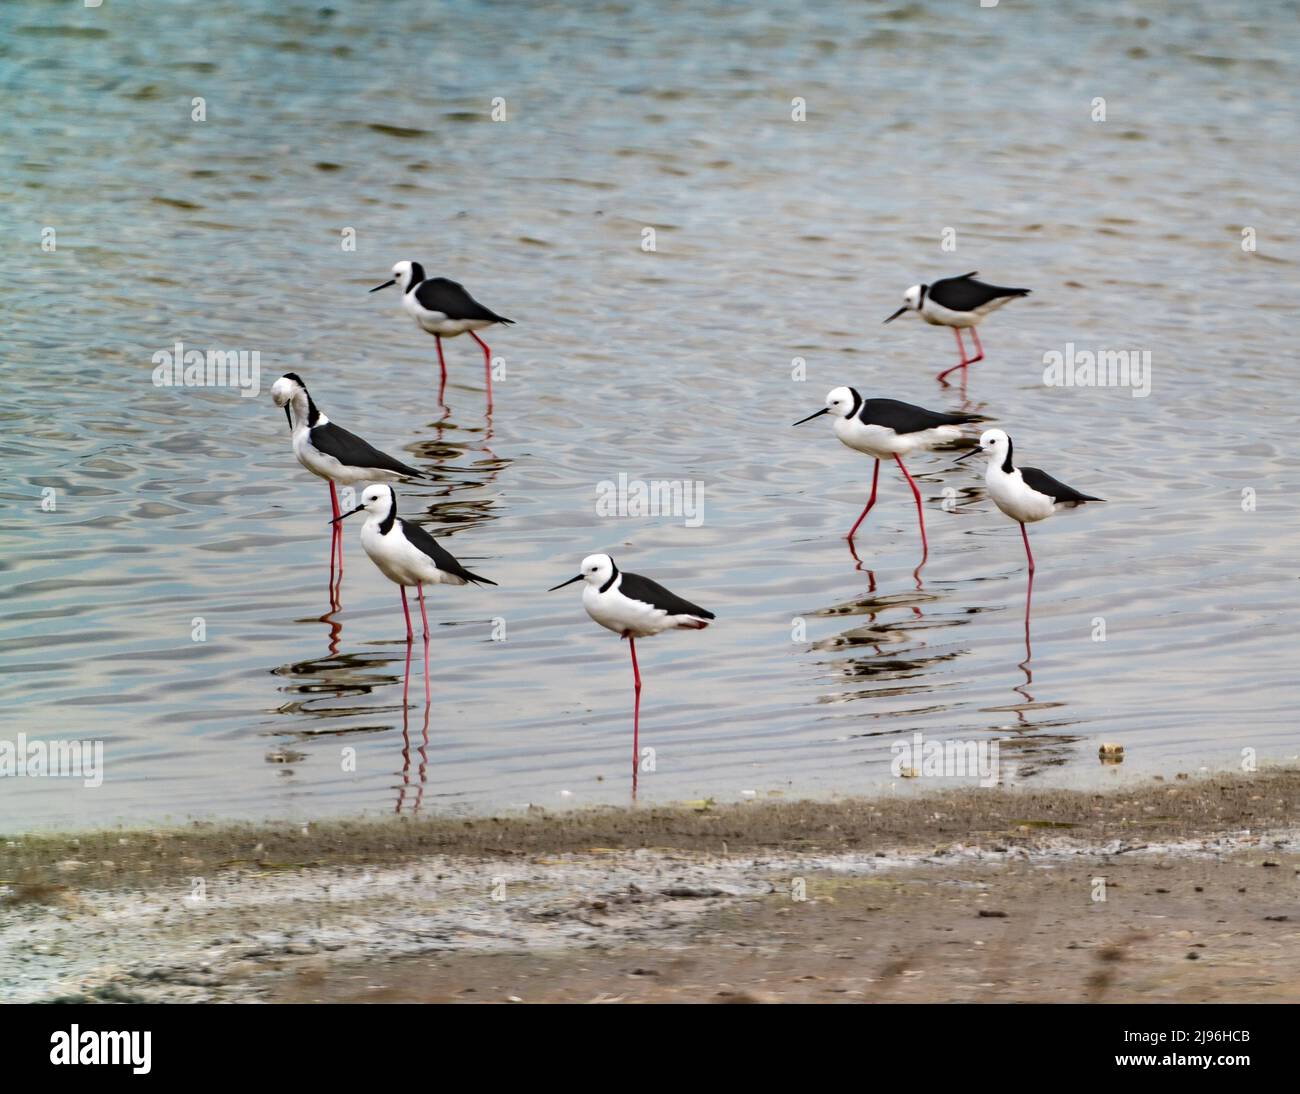 A small group of black and white shorebirds, black-winged stilts (Himantopus himantopus) with long slender beaks and pink legs Stock Photo